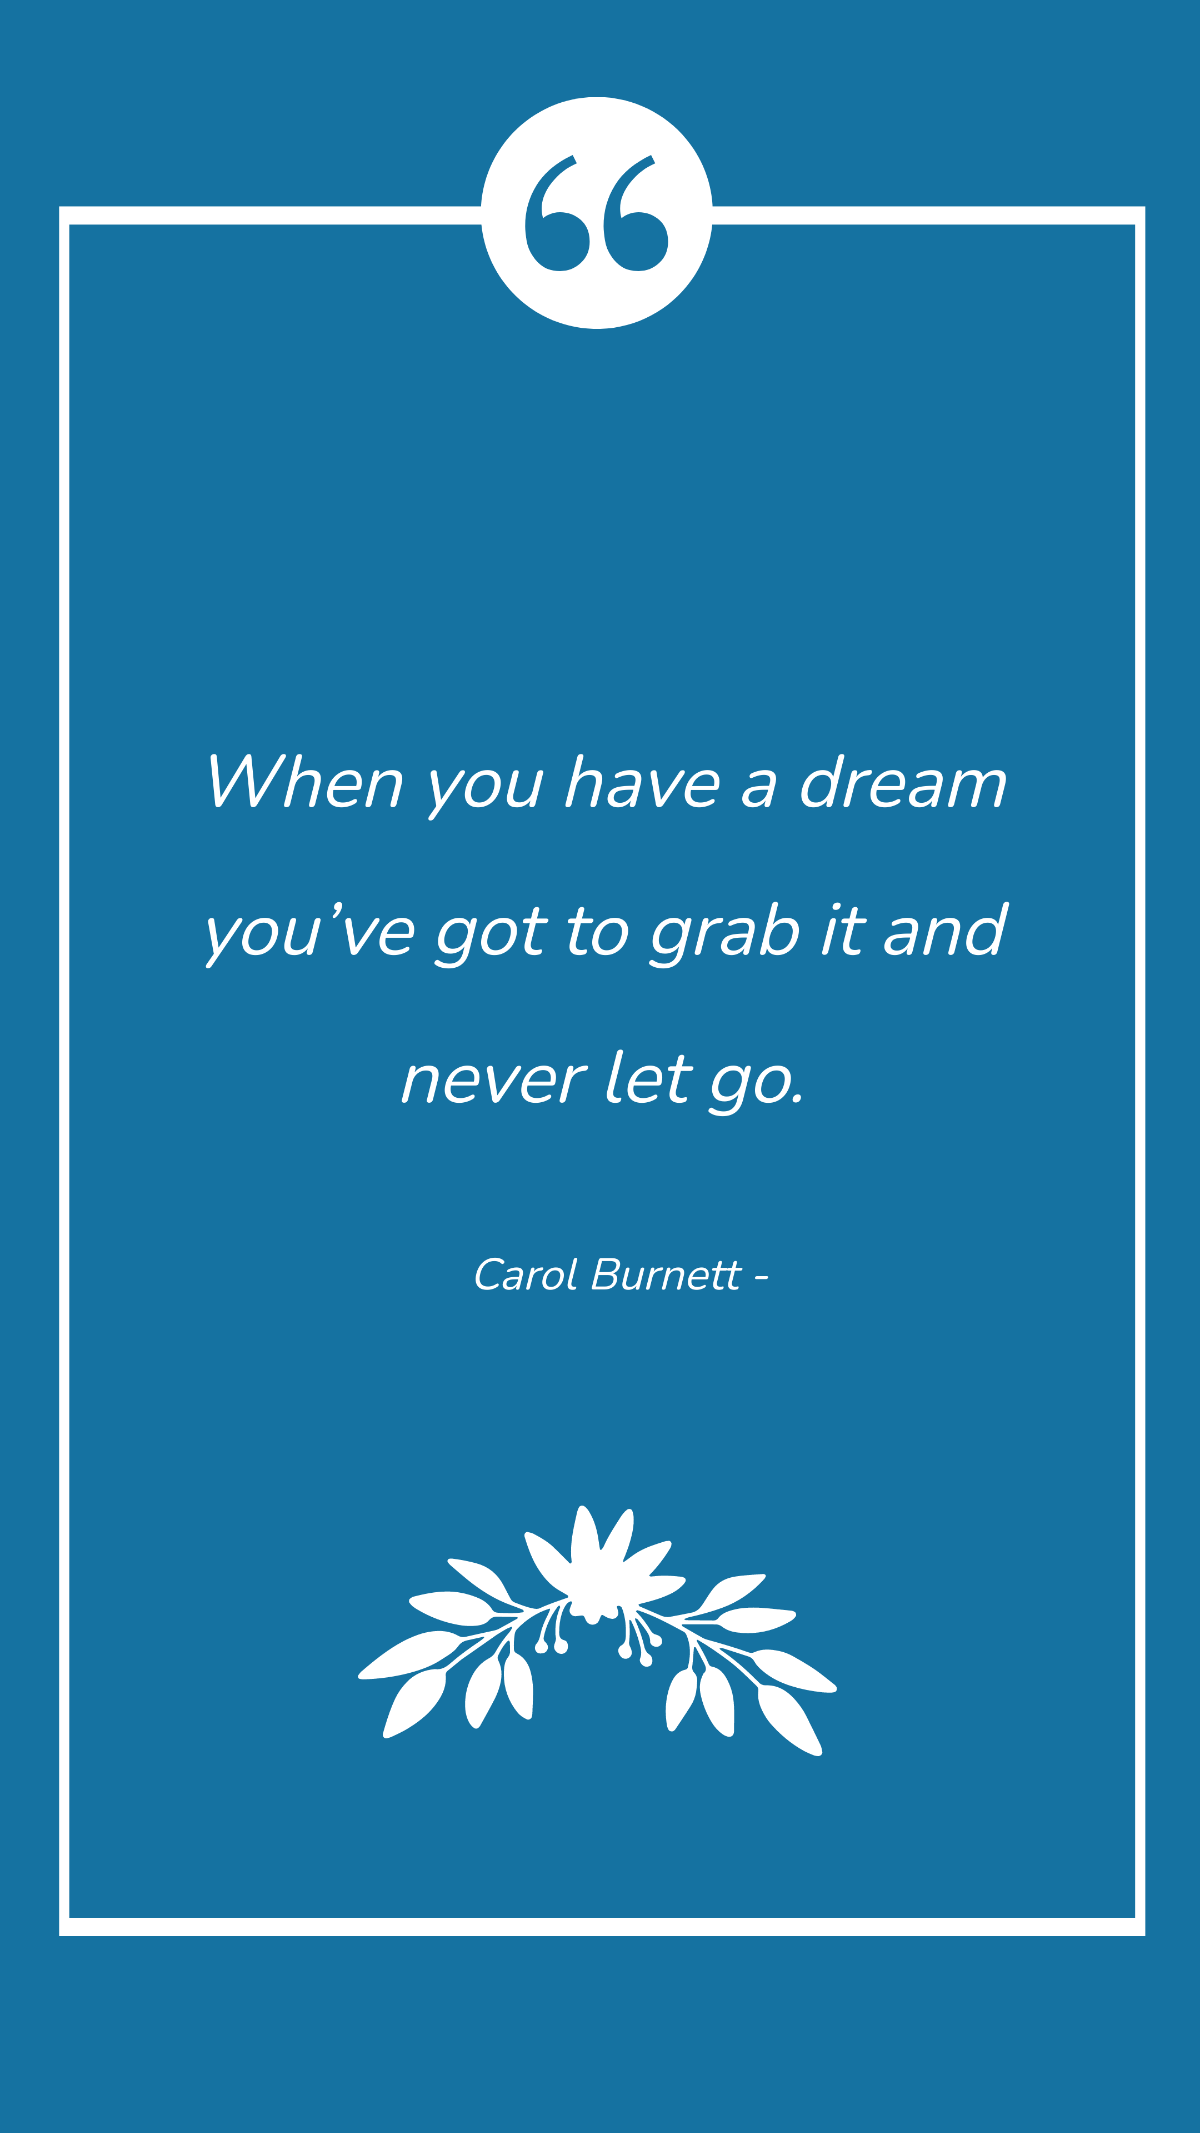 Carol Burnett - When you have a dream you’ve got to grab it and never let go. Template